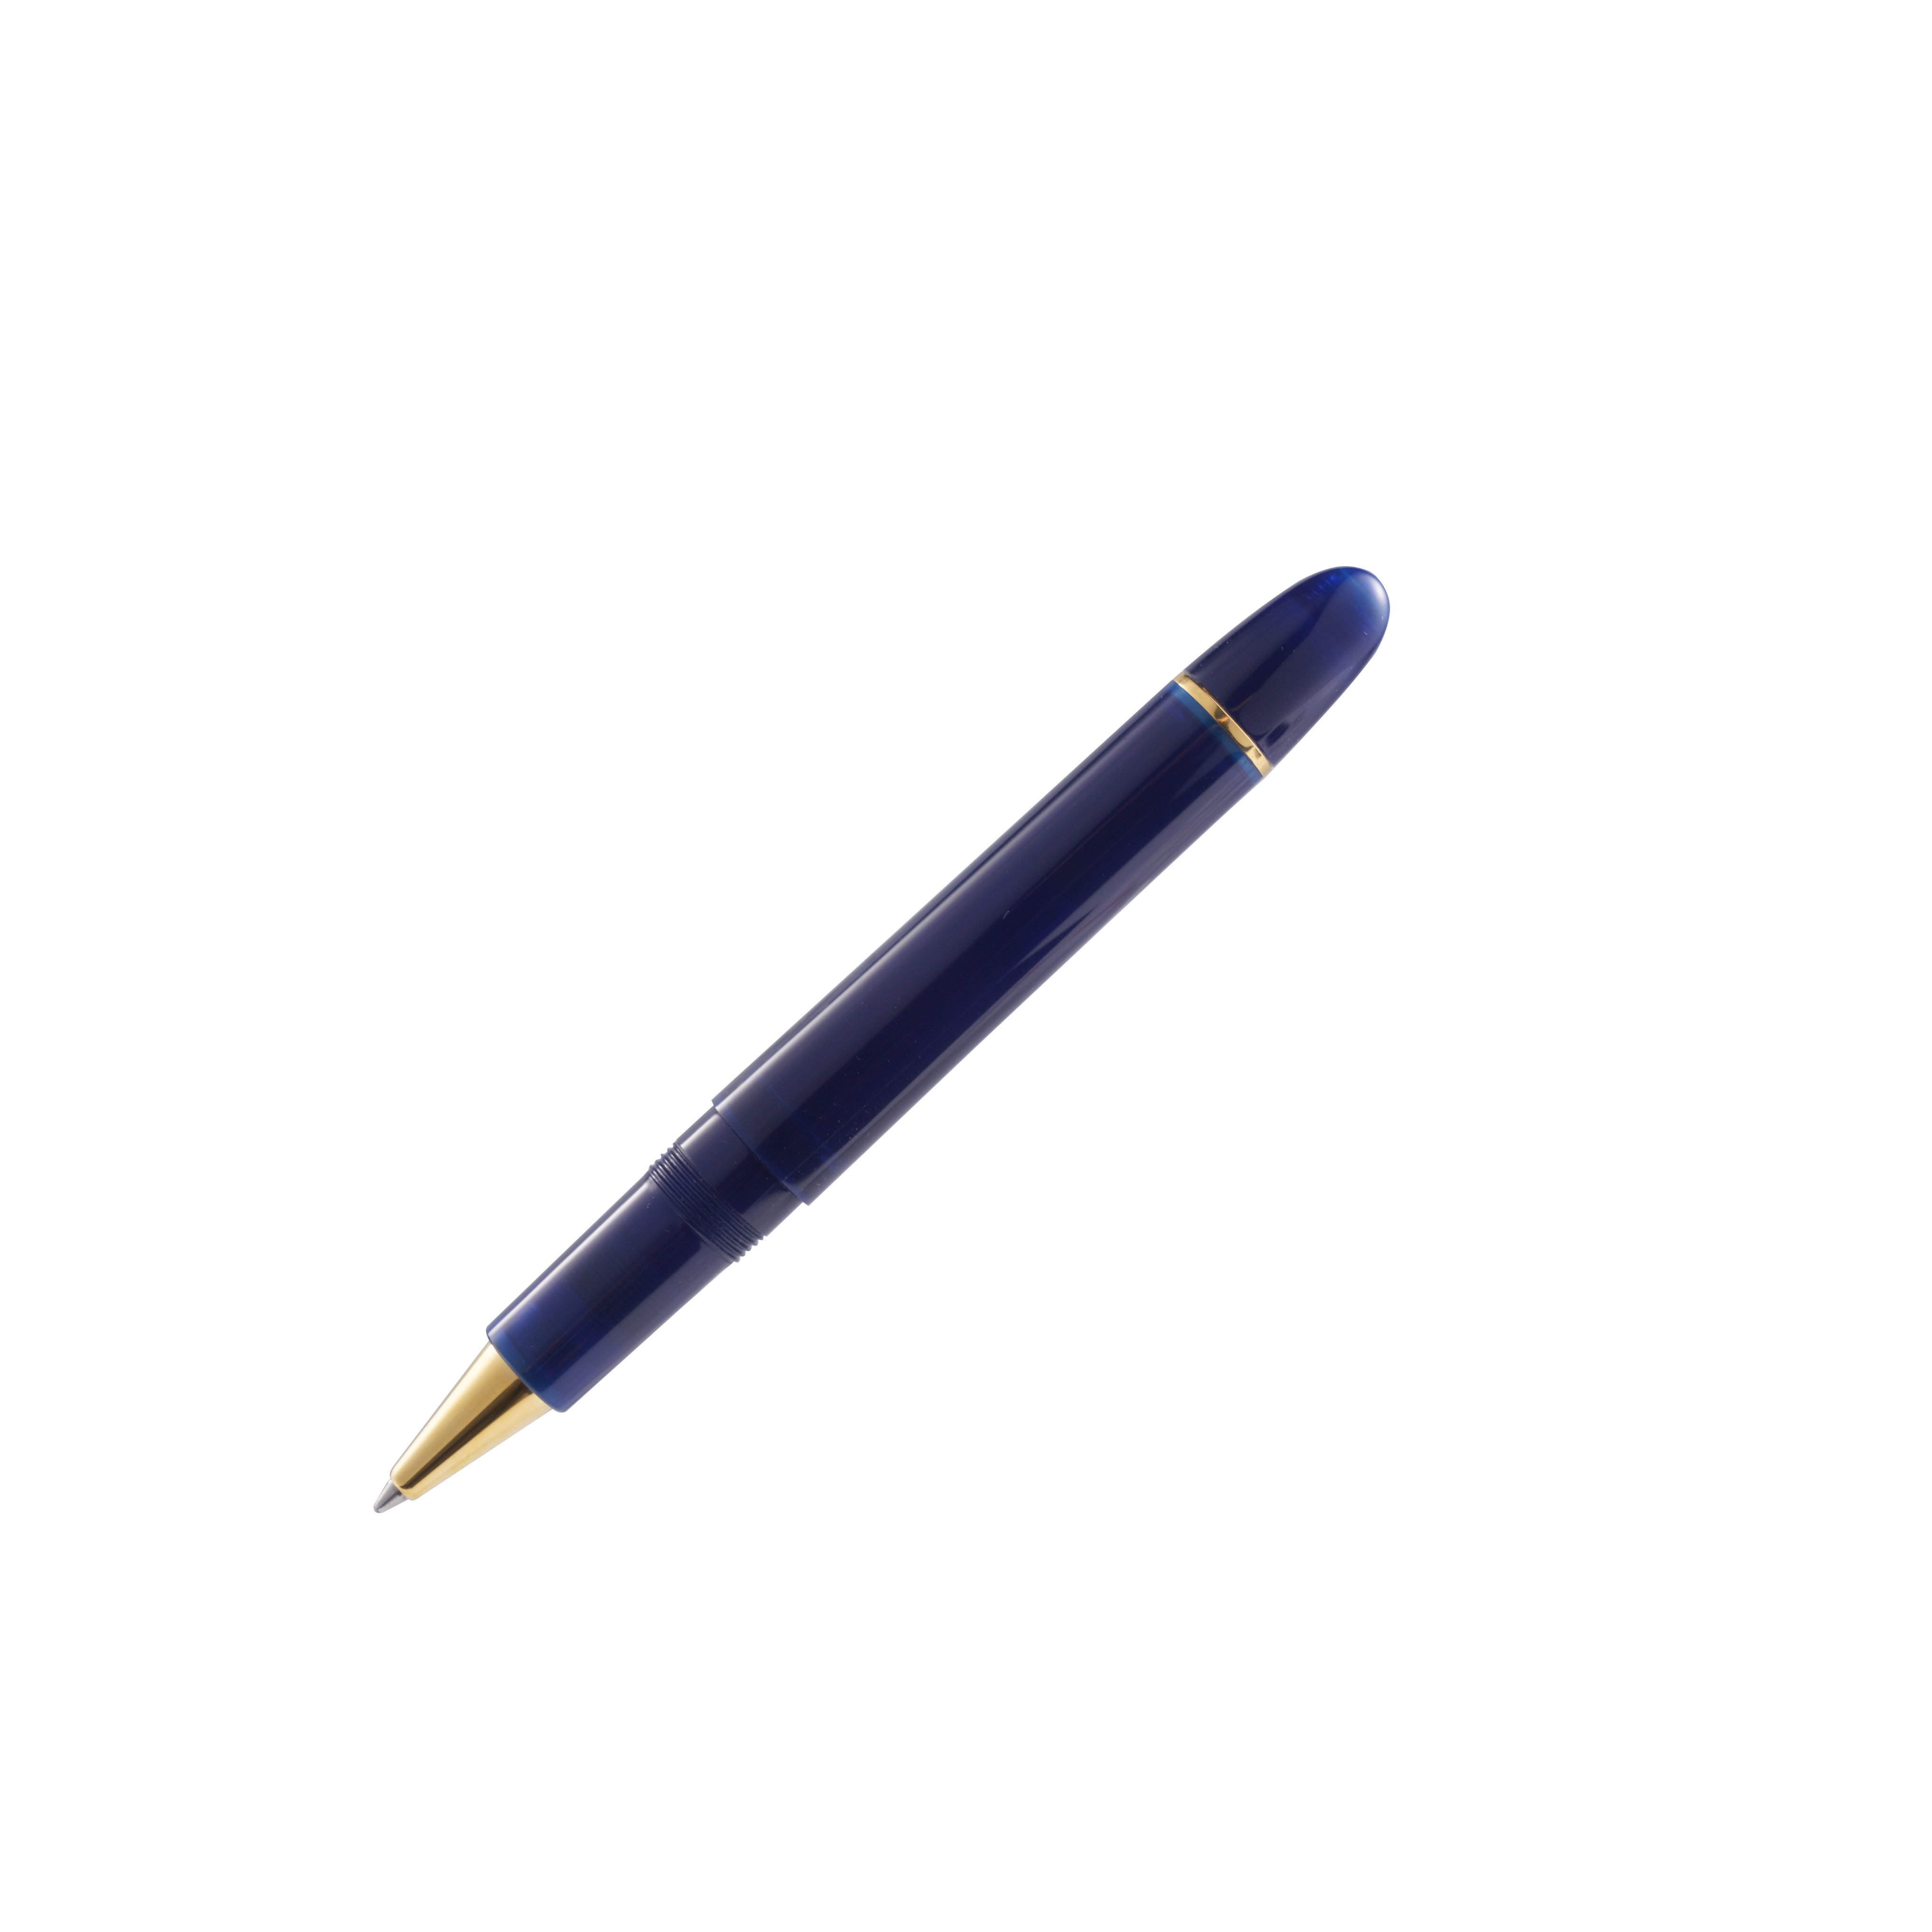 Omas Ogiva Rollerball Pen in Blu with Gold Trim